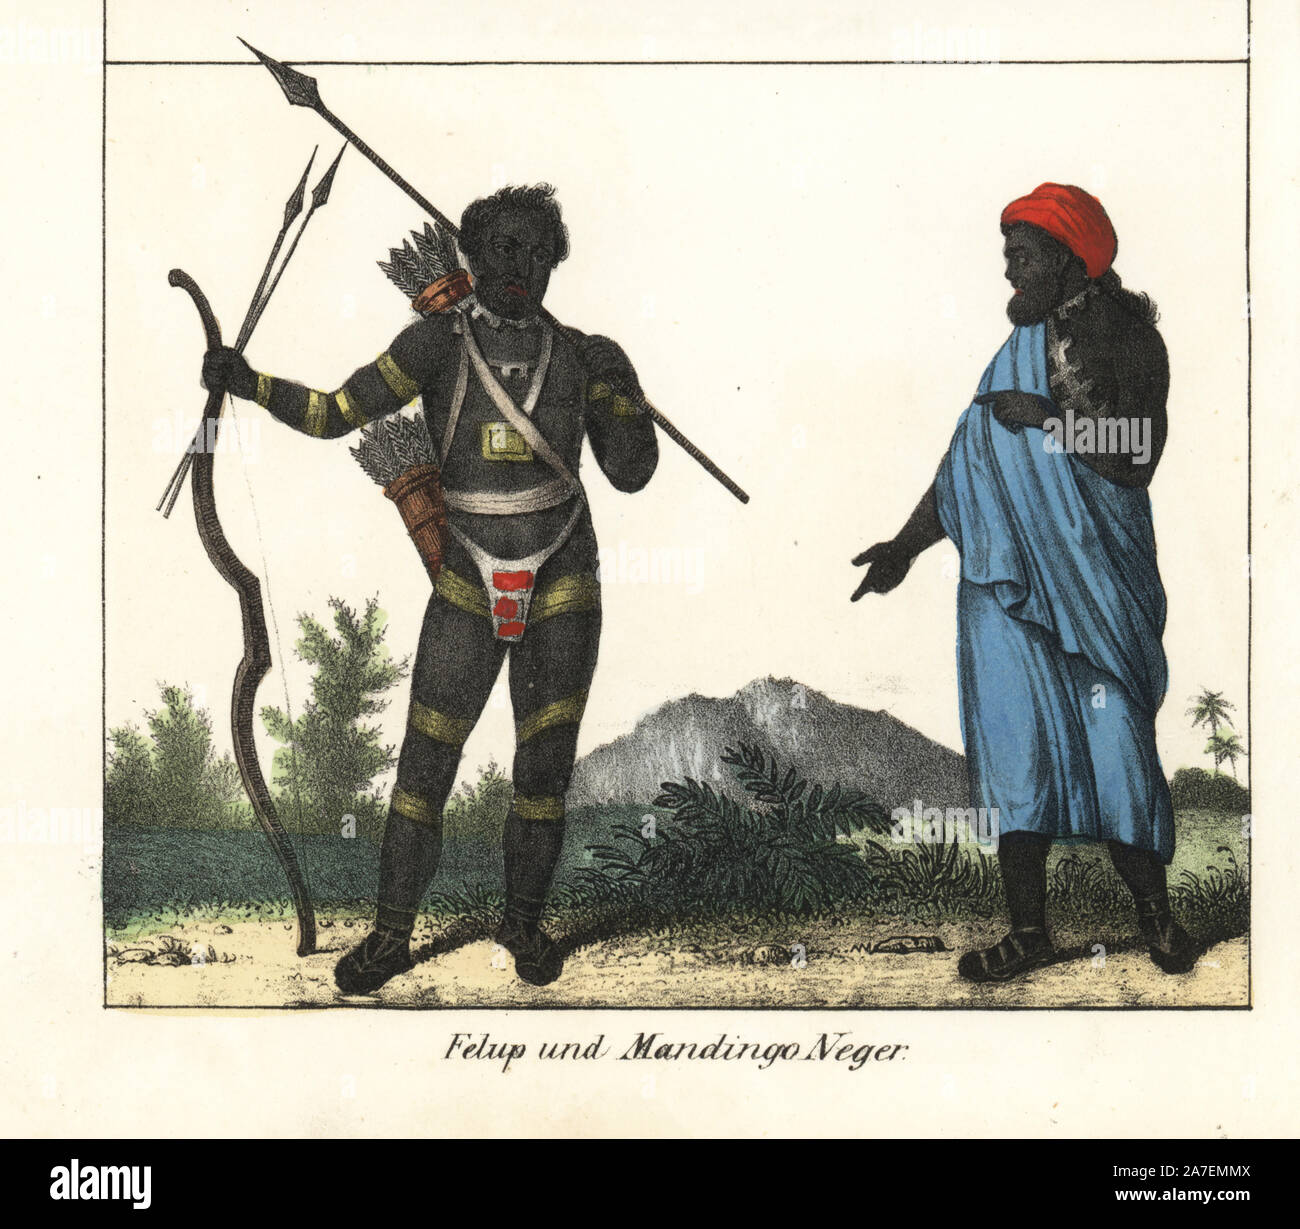 Fulup man in loin cloth and gold leg and arm bands with quivers, spears, bow and arrow, and a bearded Mandingo man in robe and turban. Handcoloured lithograph from Friedrich Wilhelm Goedsche's 'Vollstaendige Völkergallerie in getreuen Abbildungen' (Complete Gallery of Peoples in True Pictures), Meissen, circa 1835-1840. Goedsche (1785-1863) was a German writer, bookseller and publisher in Meissen. Many of the illustrations were adapted from Bertuch's 'Bilderbuch fur Kinder' and others. Stock Photo